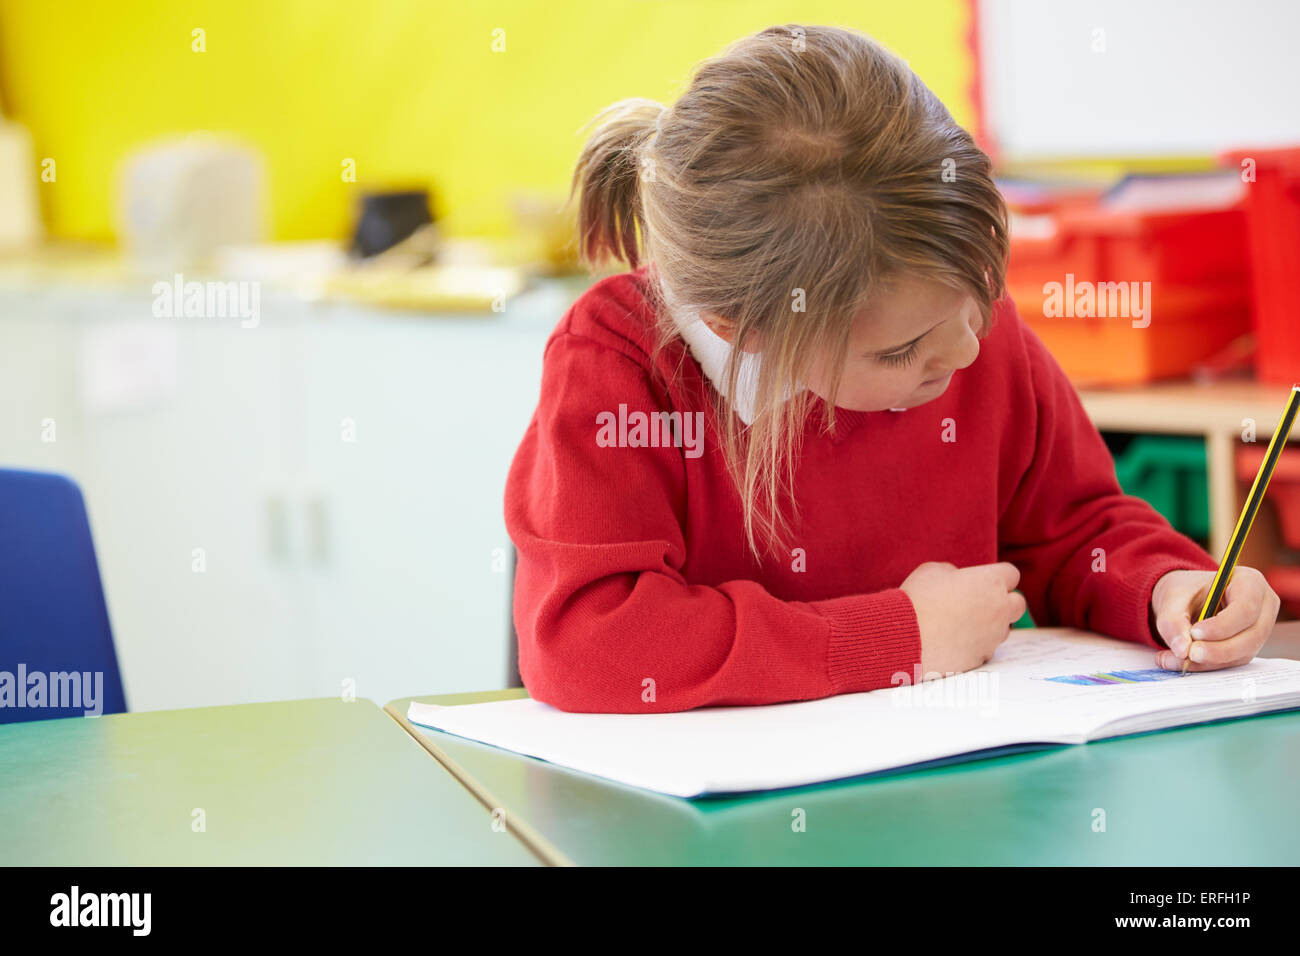 Female Pupil Practising Writing At Table Stock Photo